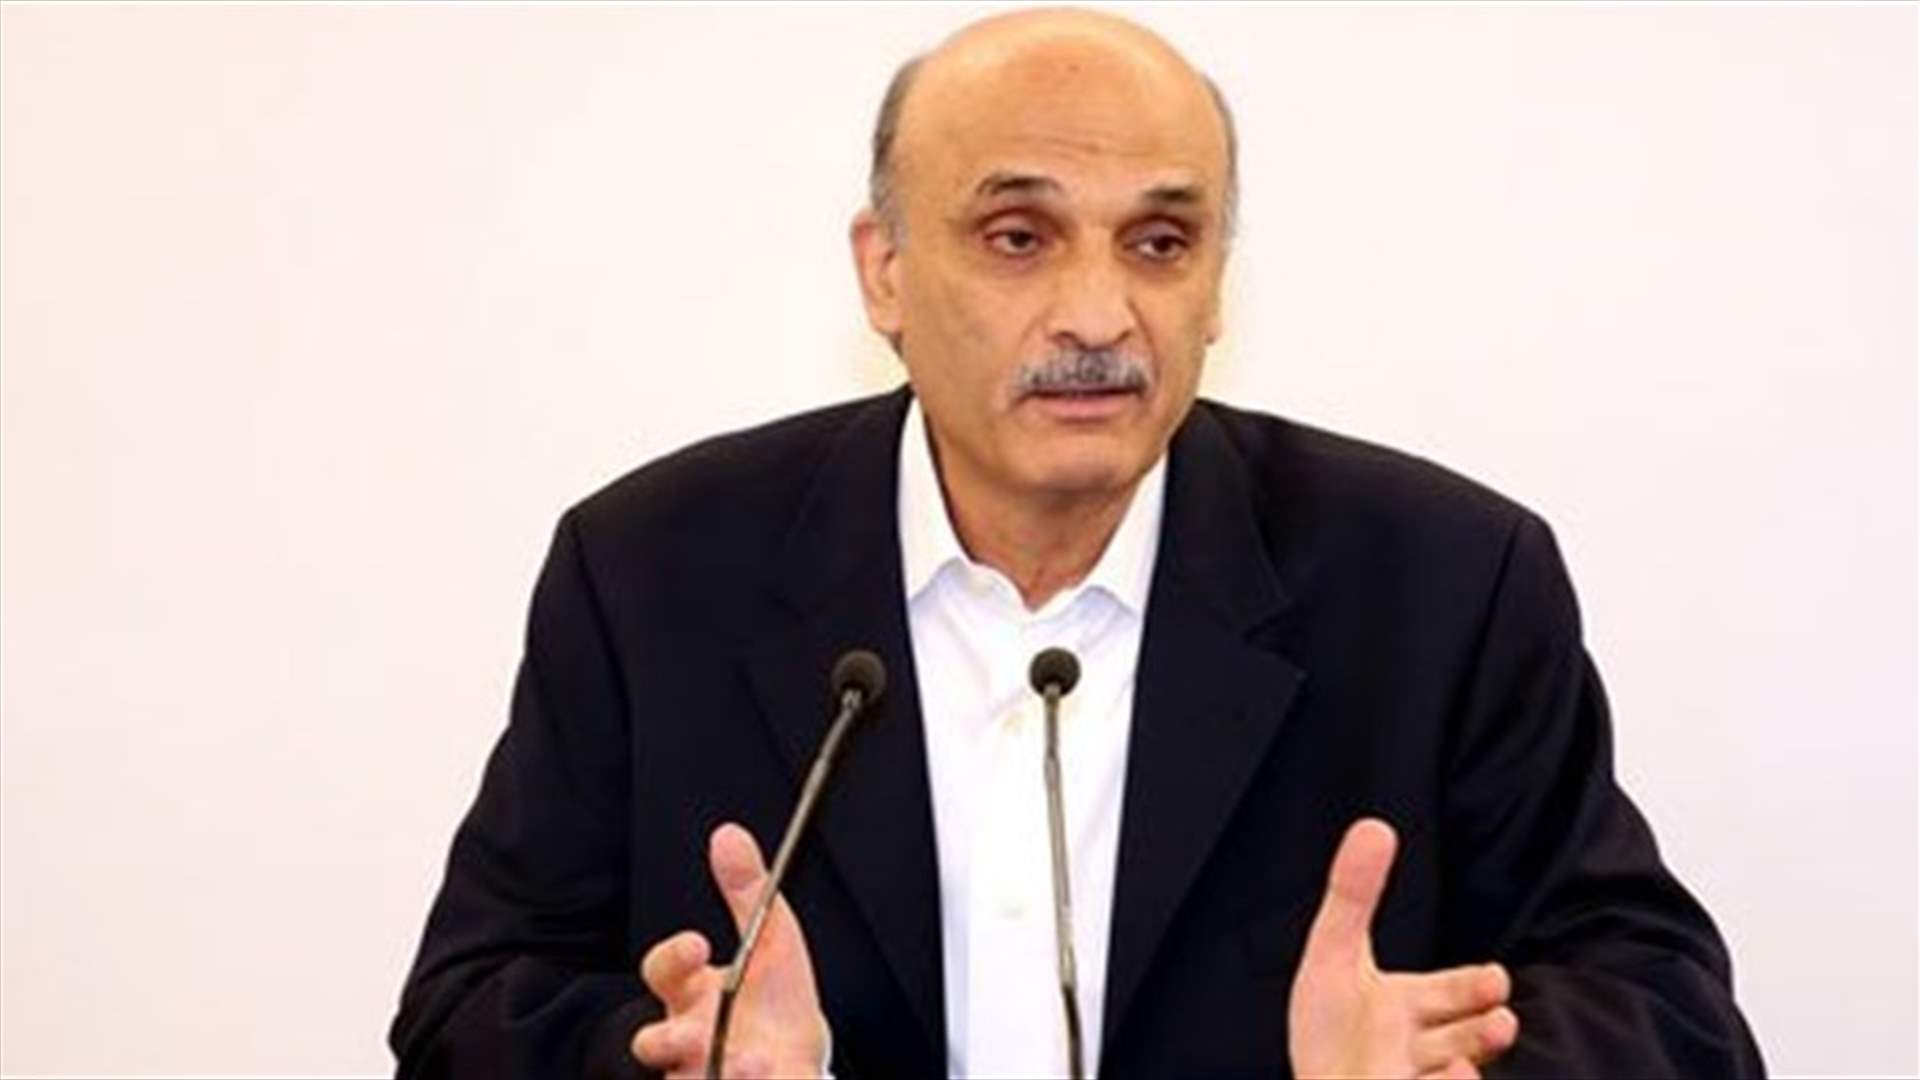 Geagea: Next president is made in Lebanon 100.2 percent